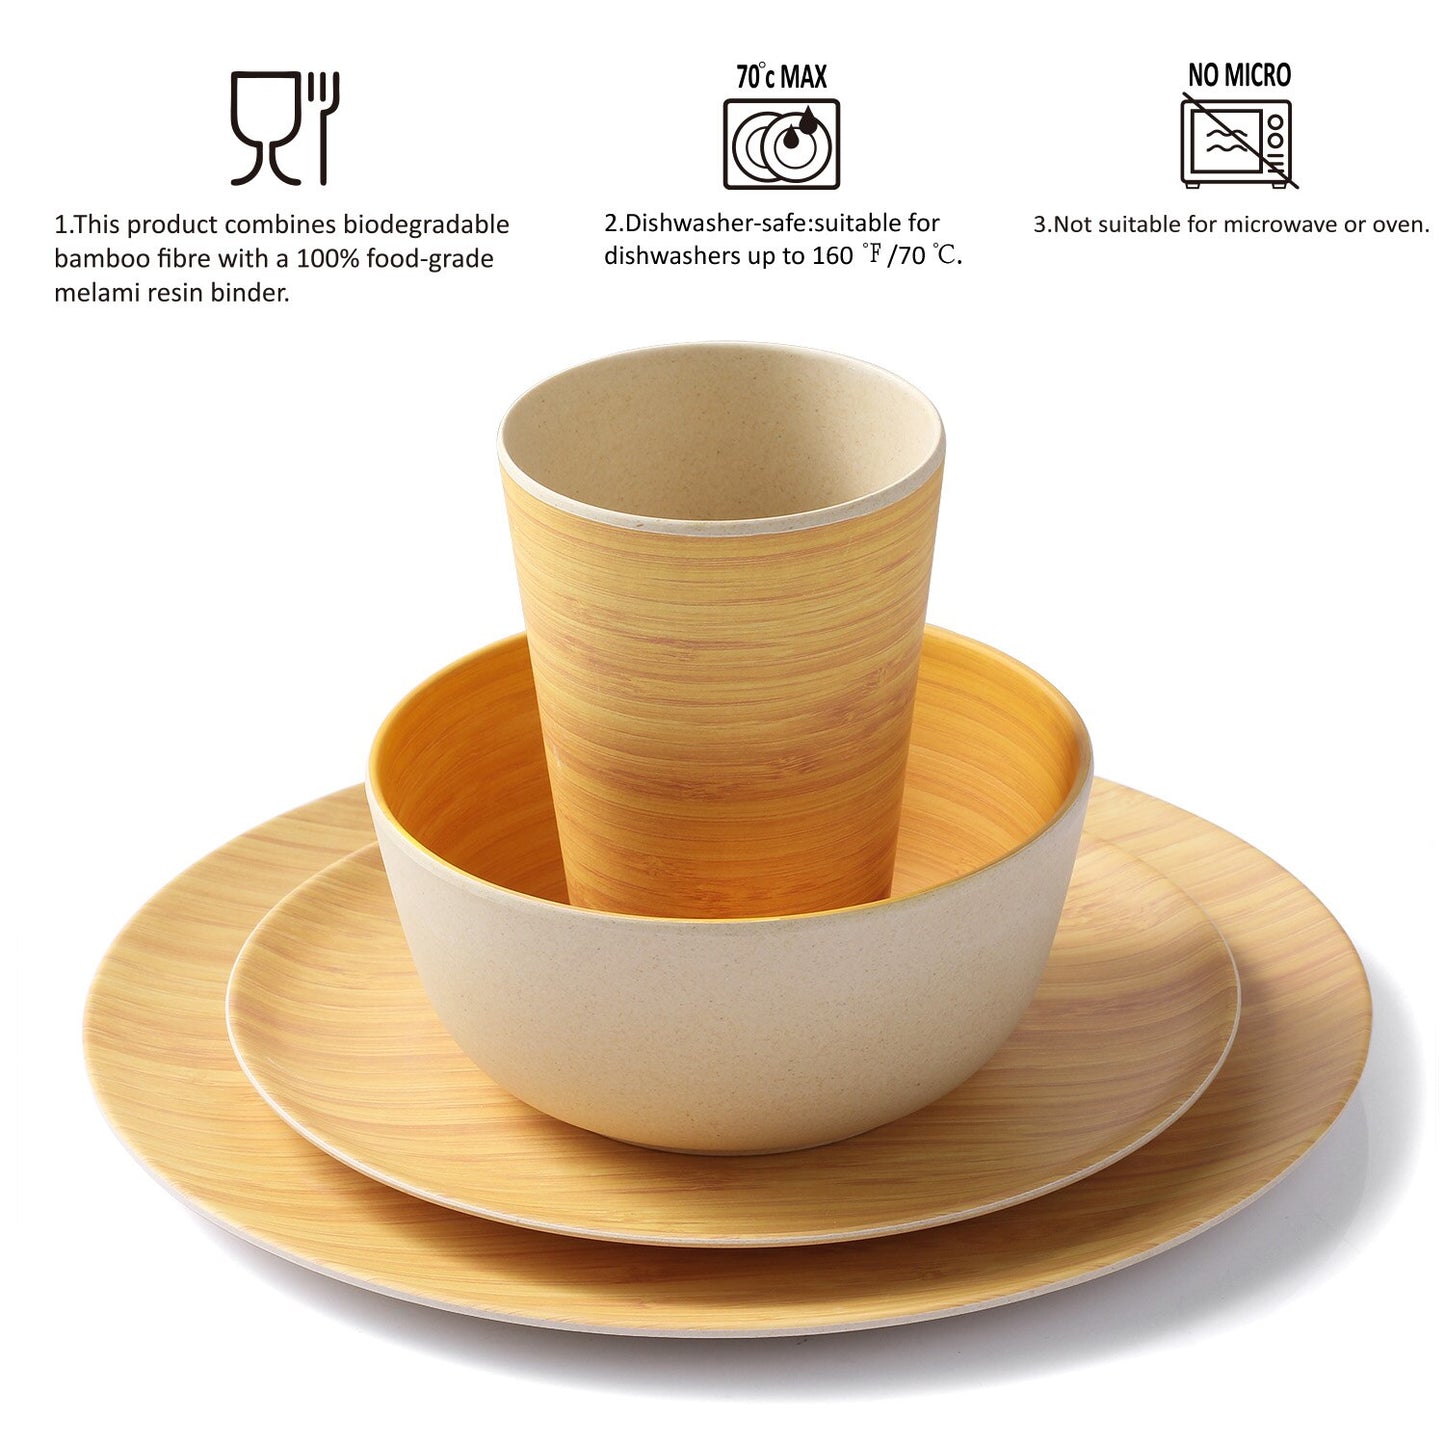 Lekoch Bamboo Fiber 4pcs for 1person  Picnic Dinner set Bamboo pattern Plate Bamboo Powder Fiber Dishes and Plates Sets - youronestopstore23